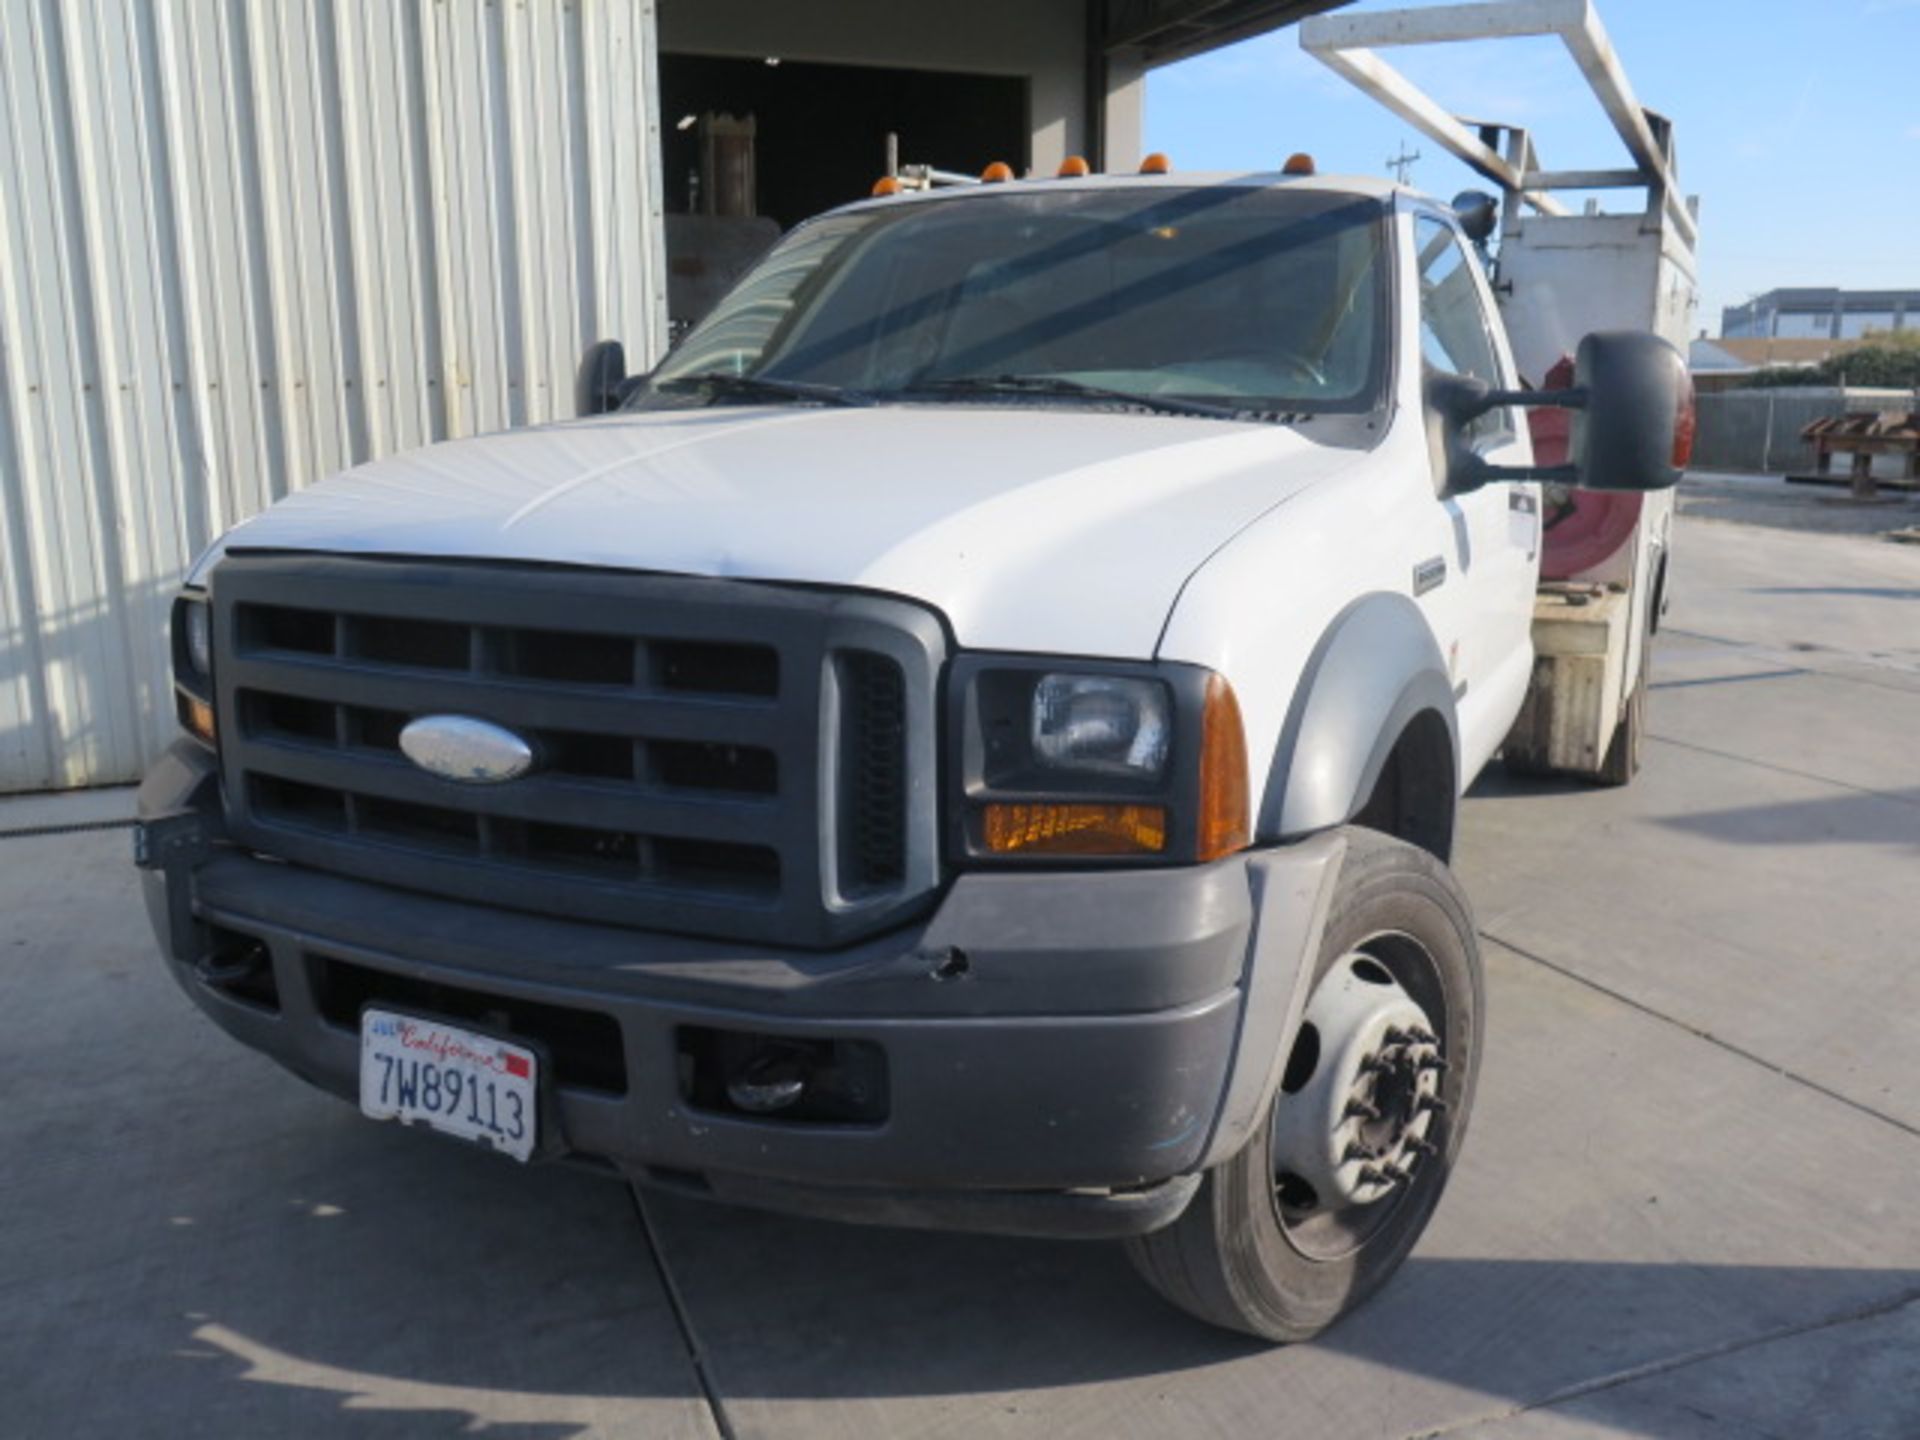 2012 Ford F-550 XL Super Duty 4X4 Service Welding Truck Lisc# 7W89113 w/ Turbo Diesel, SOLD AS IS - Image 2 of 42